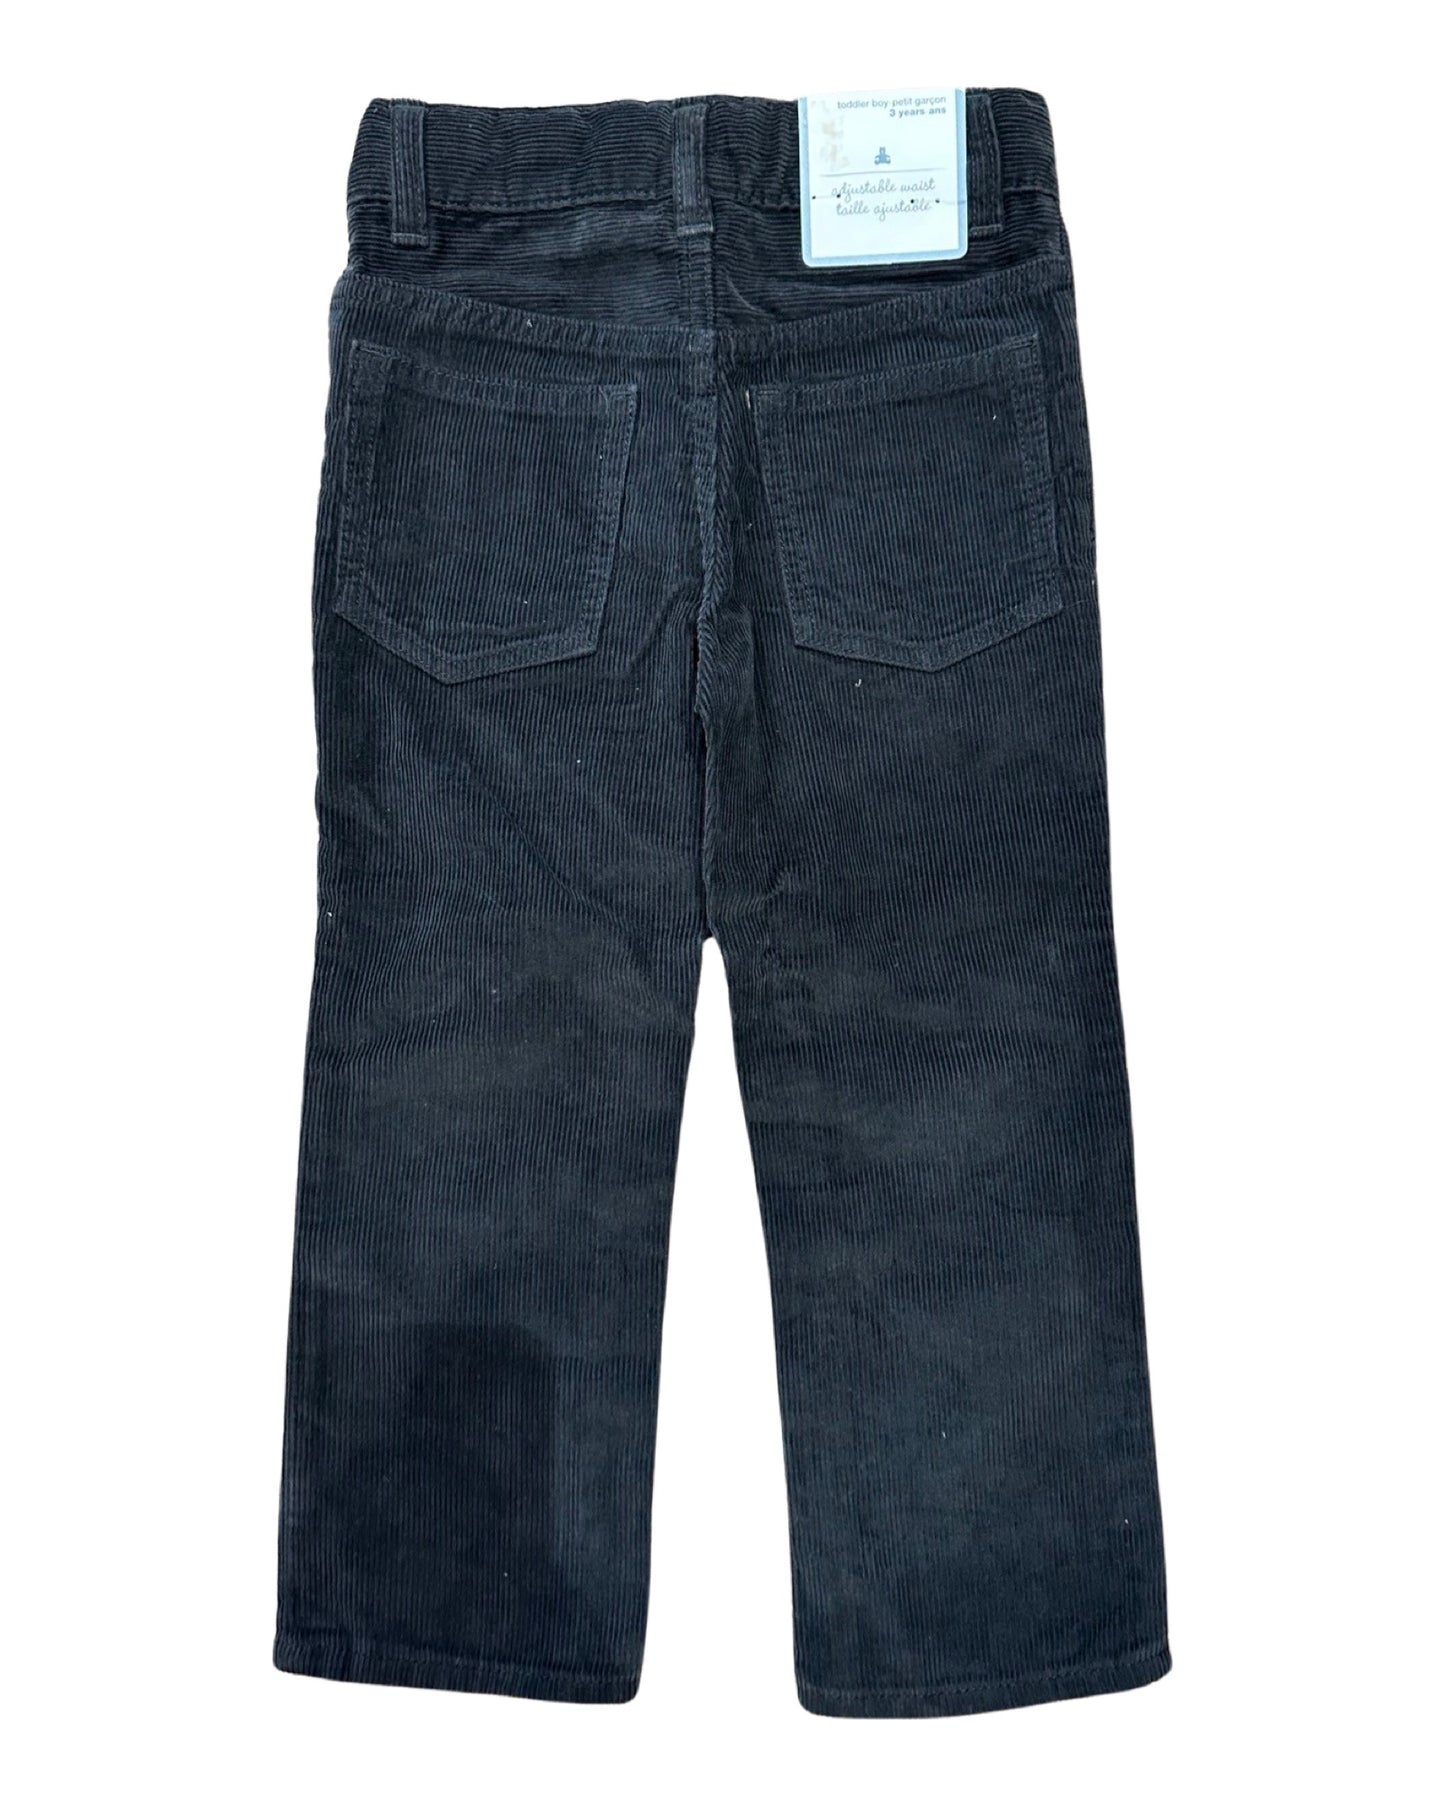 Baby Gap charcoal cord trousers (2-3yrs)